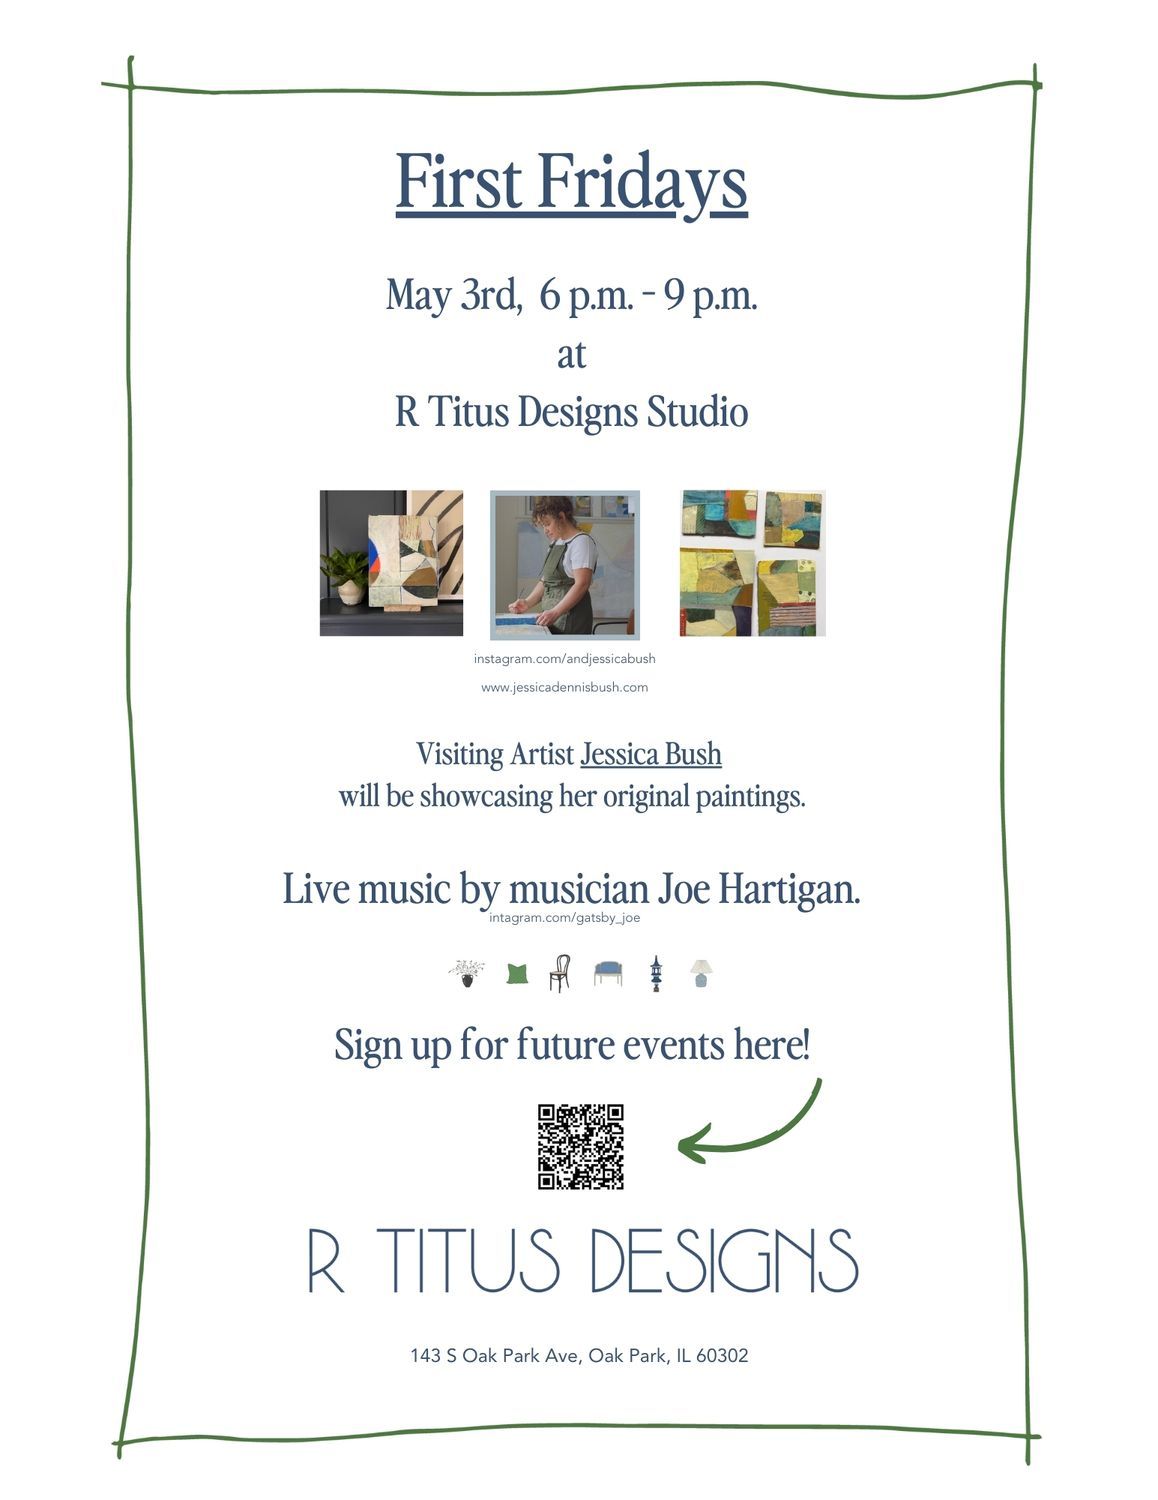 First Friday at R Titus Designs Studio